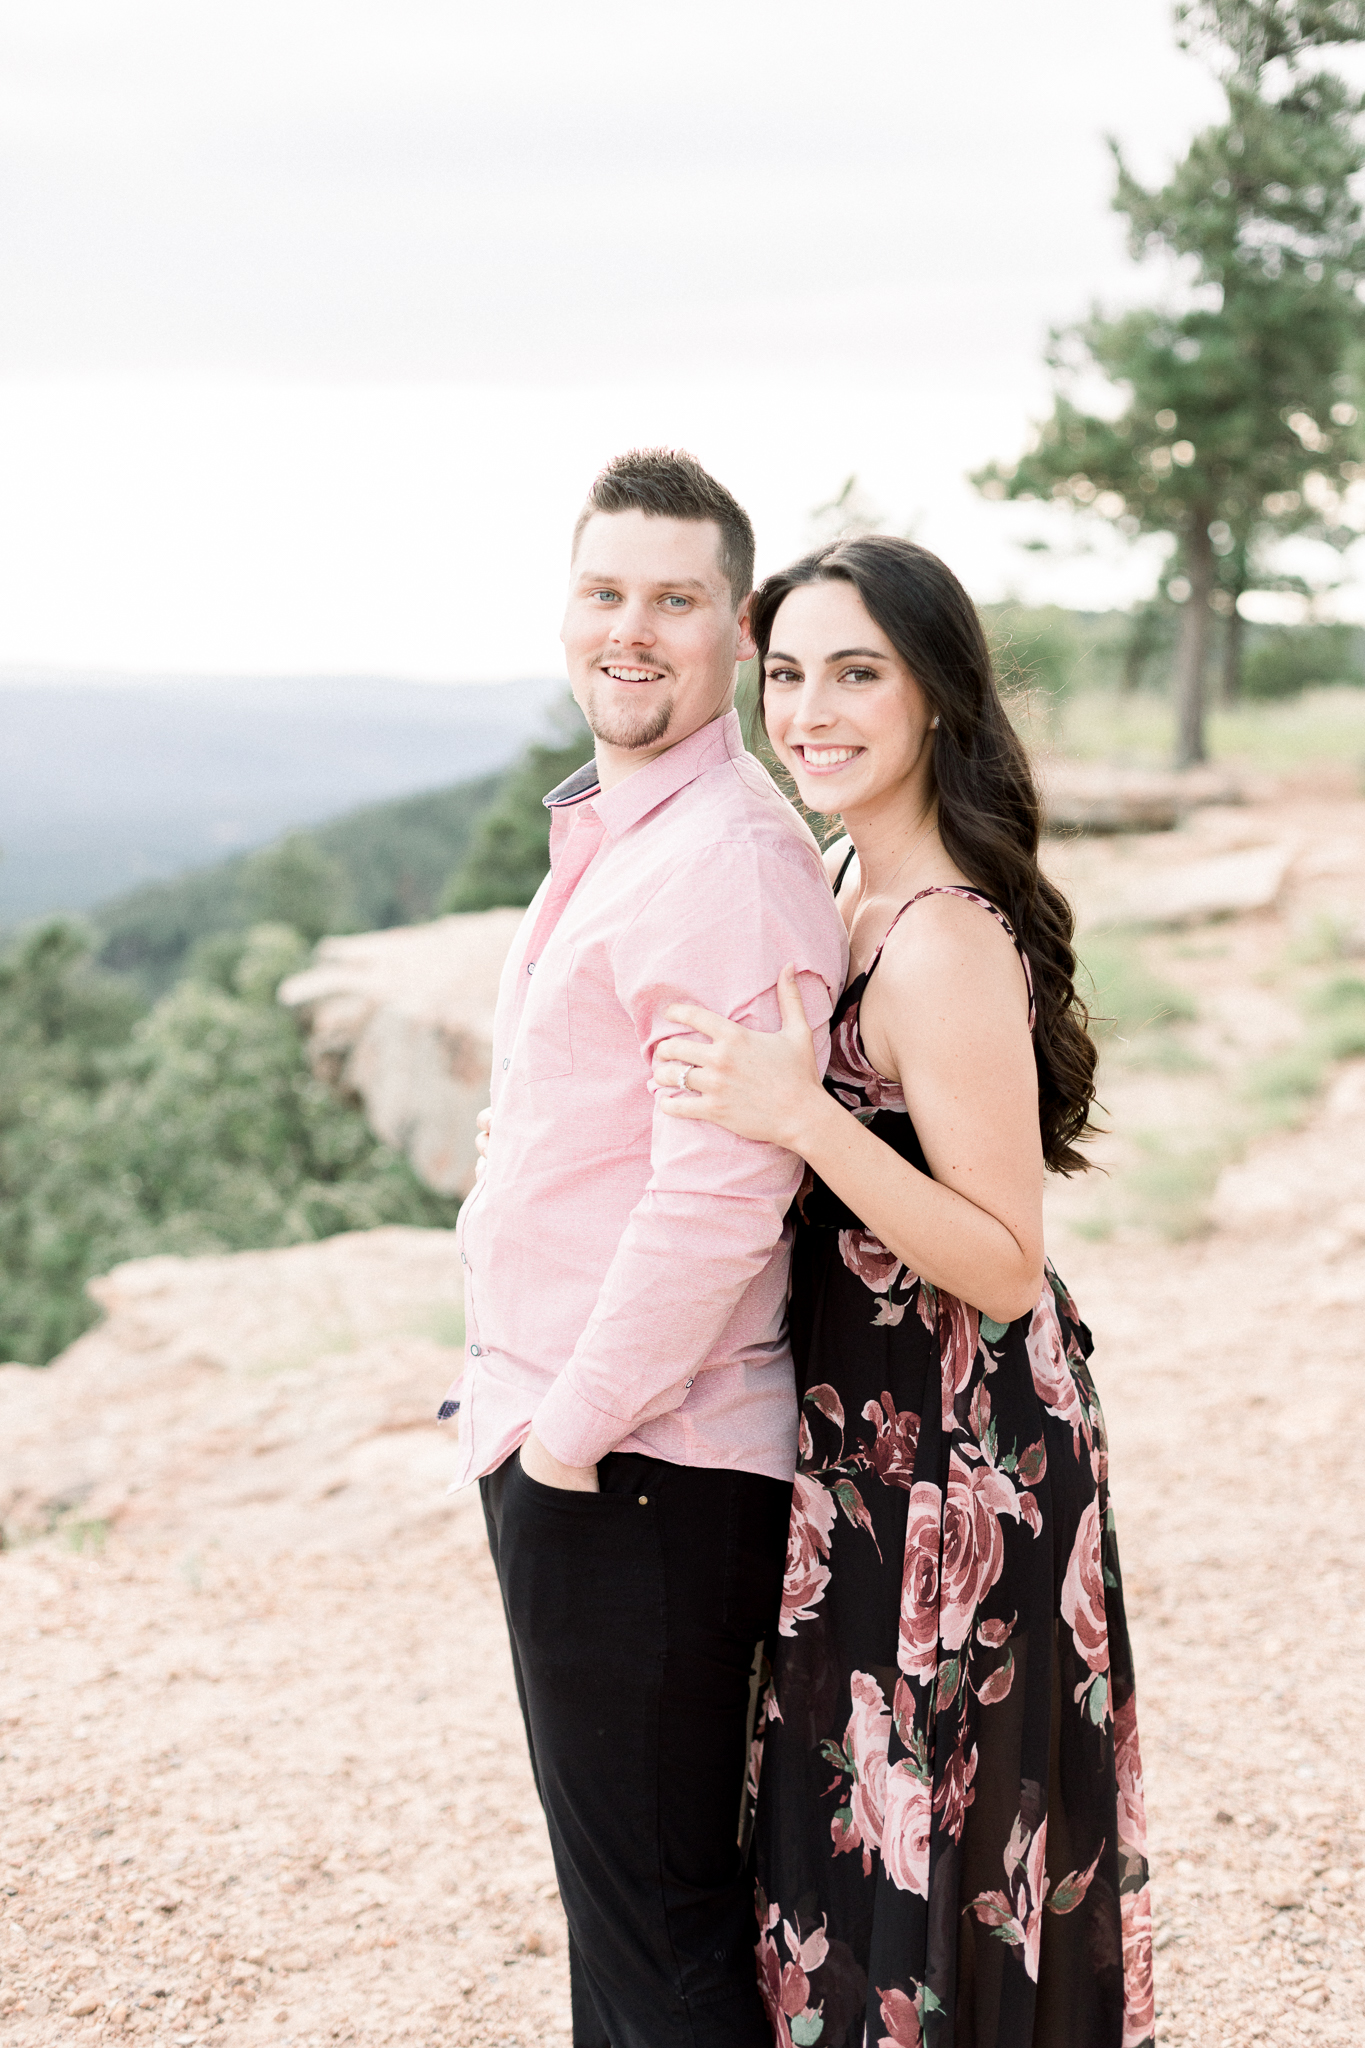 Lindsey & Brandon: a Payson Engagement Story by Caitlin Audrey Photography